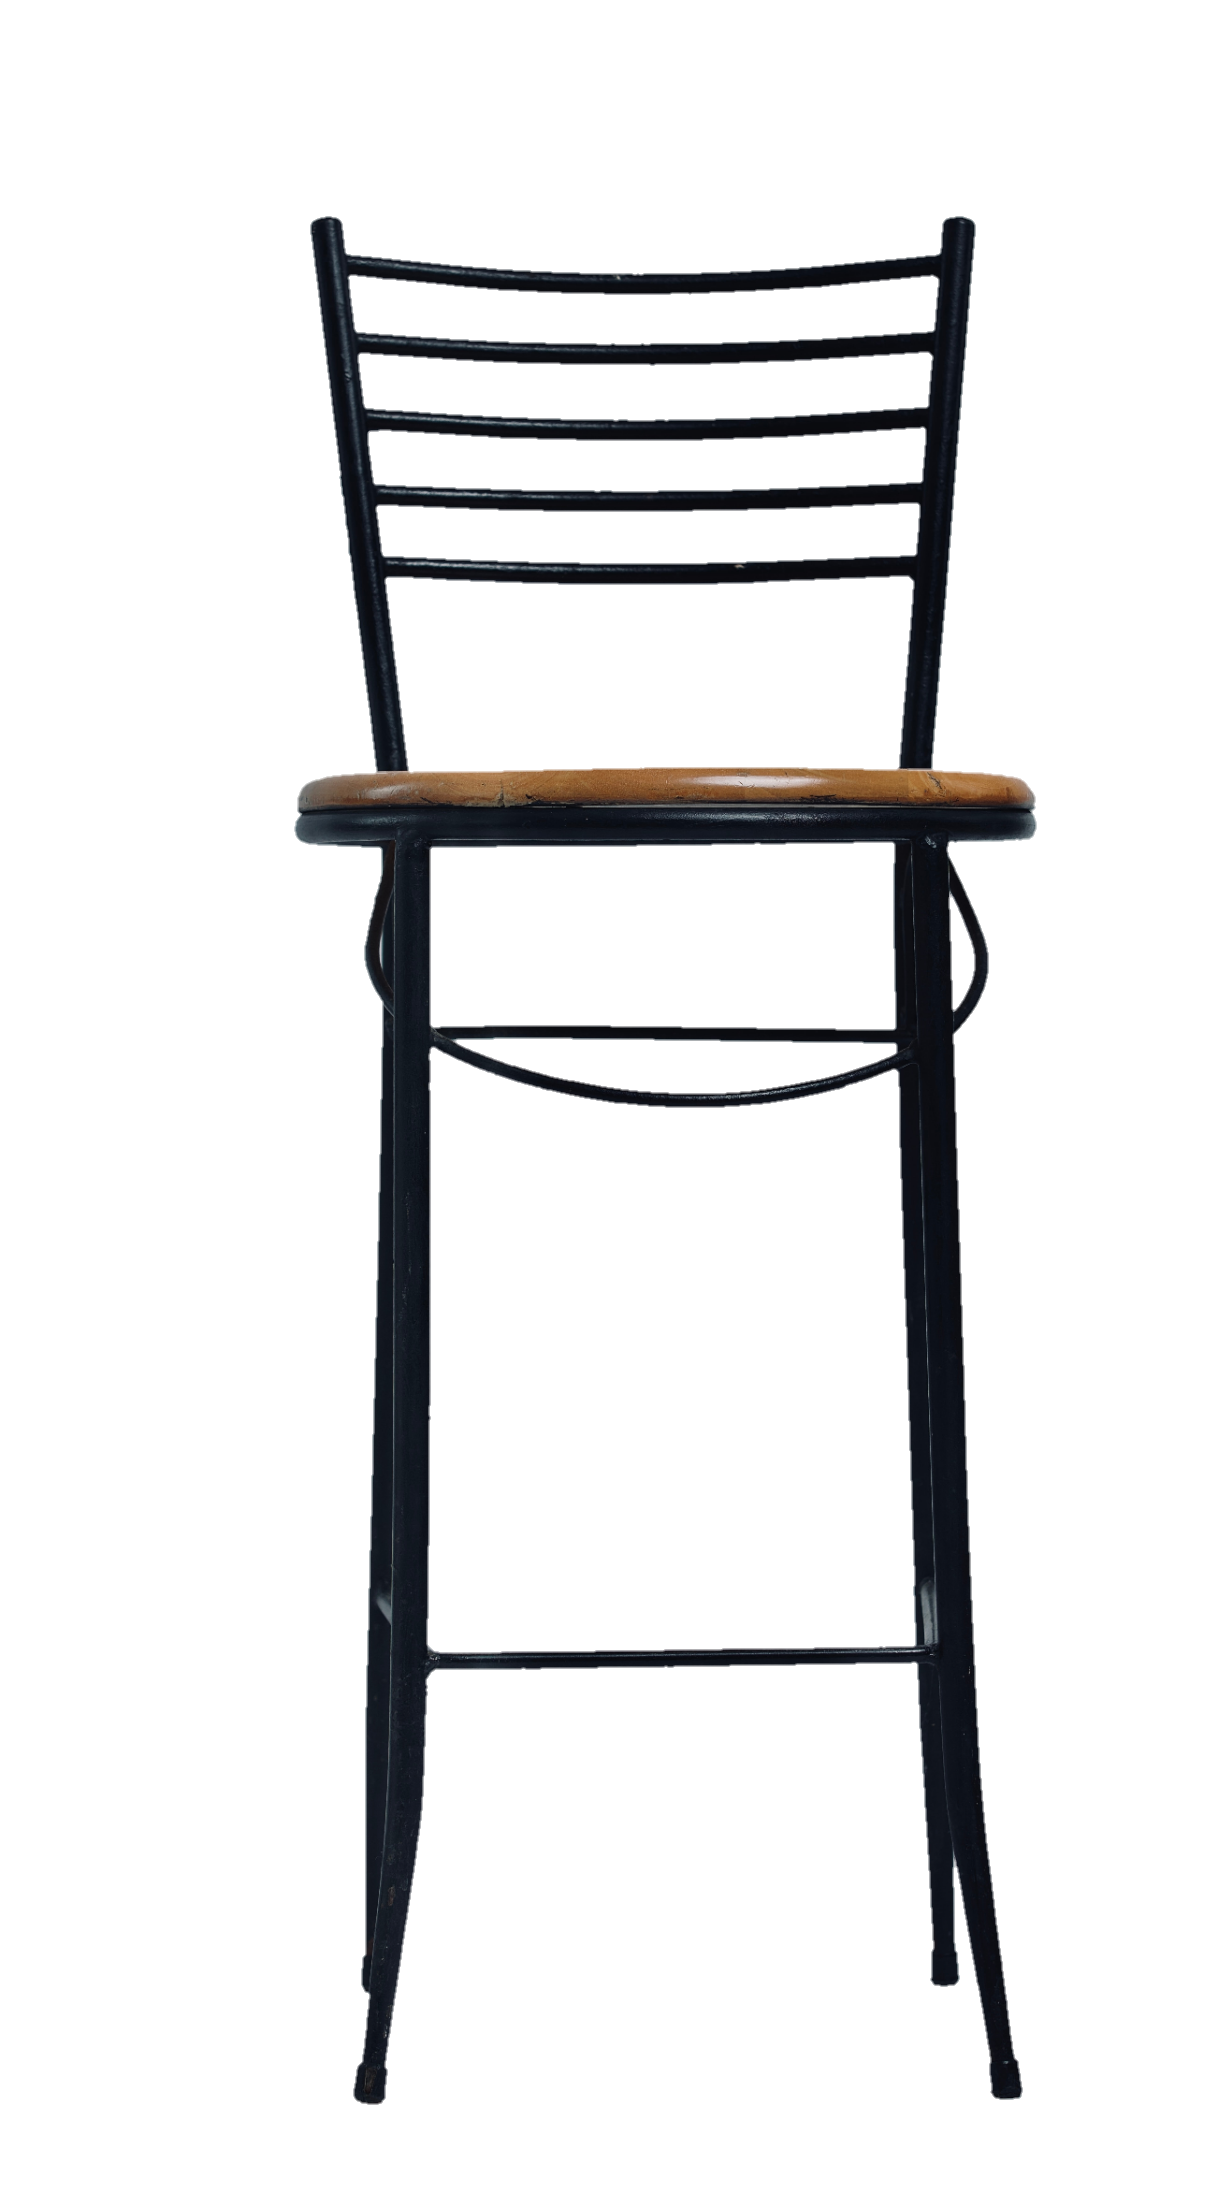 chair-png-image-pngfre-13